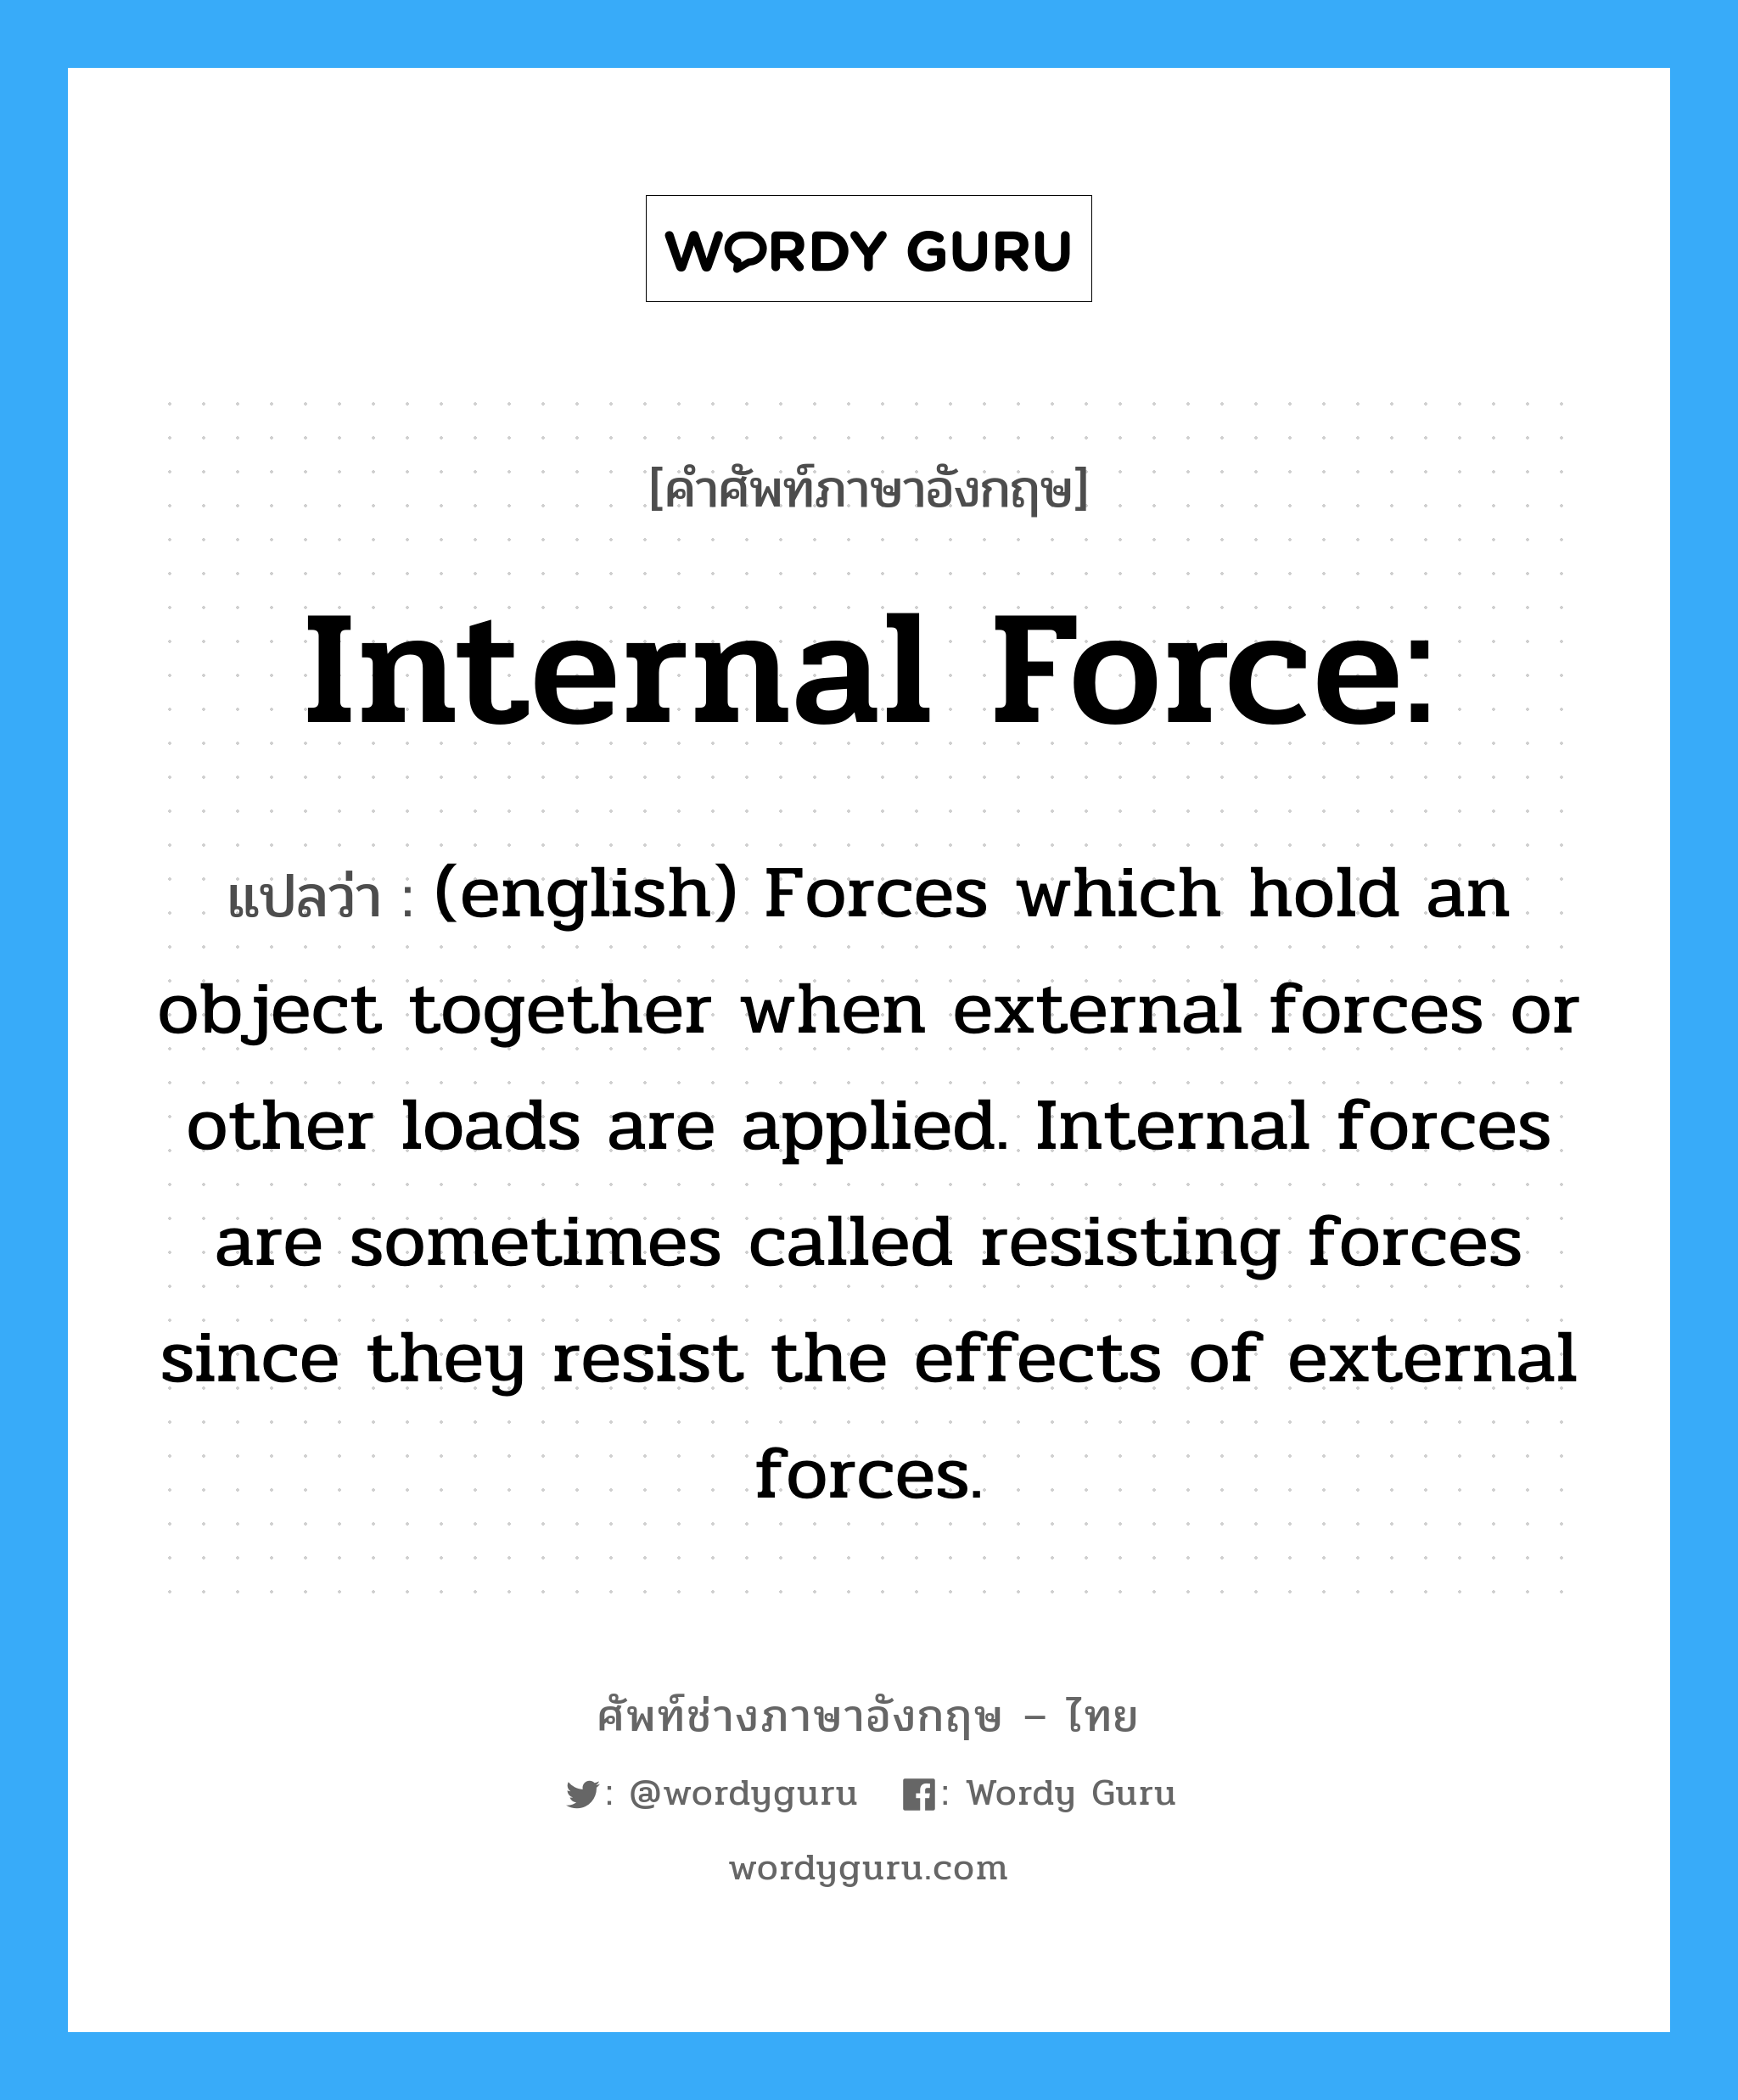 (english) Forces which hold an object together when external forces or other loads are applied. Internal forces are sometimes called resisting forces since they resist the effects of external forces. ภาษาอังกฤษ?, คำศัพท์ช่างภาษาอังกฤษ - ไทย (english) Forces which hold an object together when external forces or other loads are applied. Internal forces are sometimes called resisting forces since they resist the effects of external forces. คำศัพท์ภาษาอังกฤษ (english) Forces which hold an object together when external forces or other loads are applied. Internal forces are sometimes called resisting forces since they resist the effects of external forces. แปลว่า Internal force: